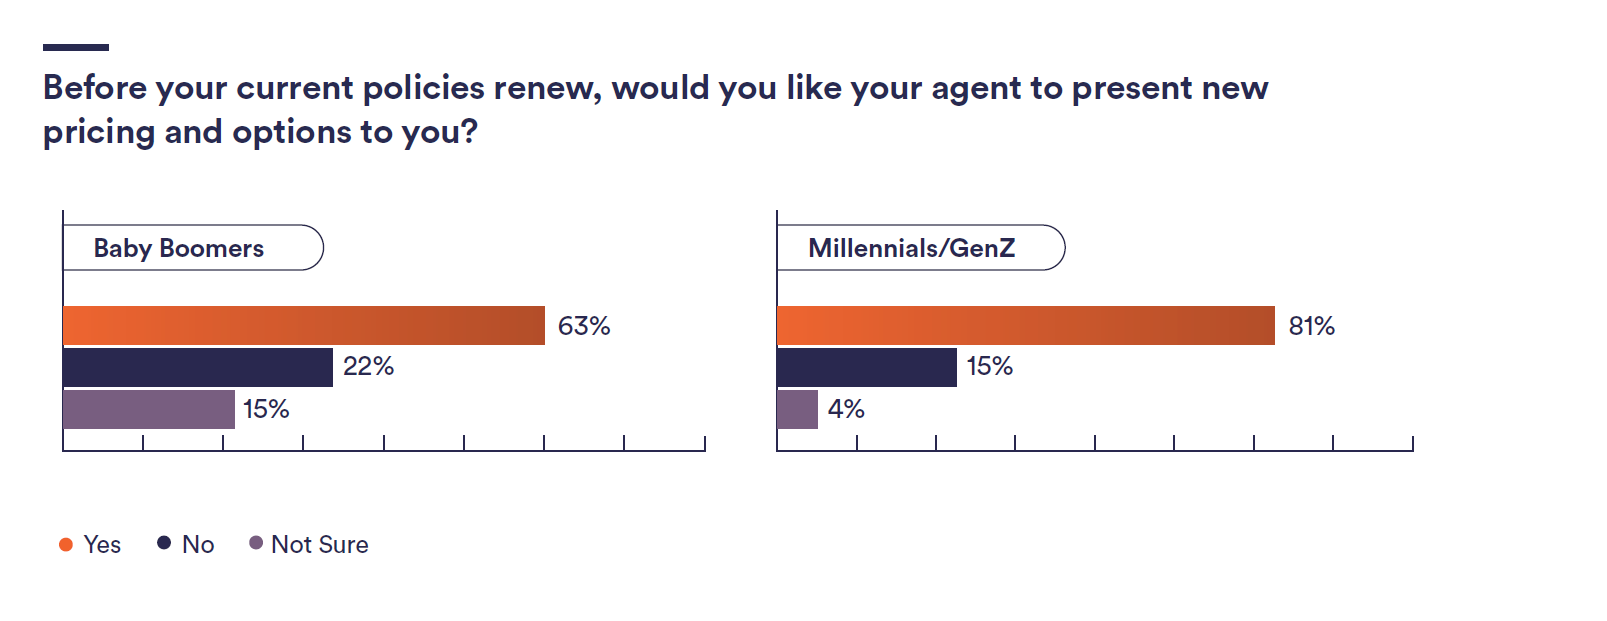 Millennial vs. Boomer desire for agents to advise